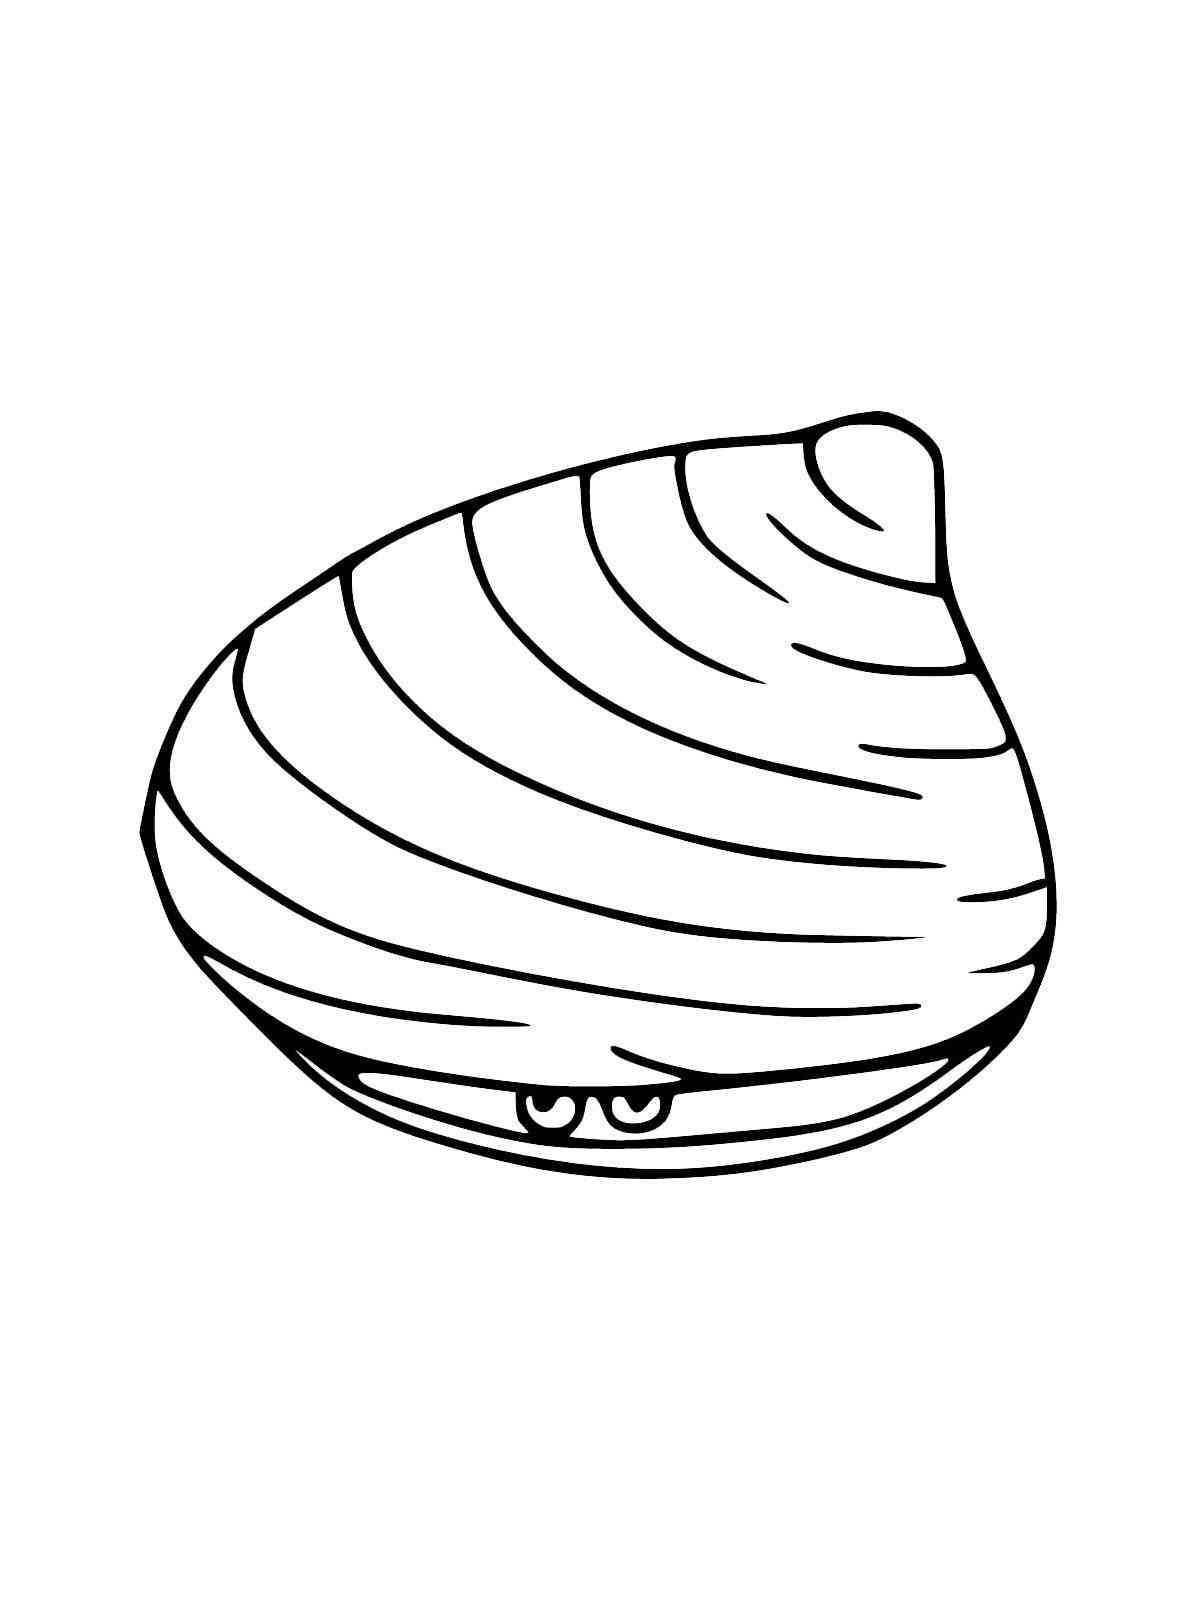 Closed Clam coloring page